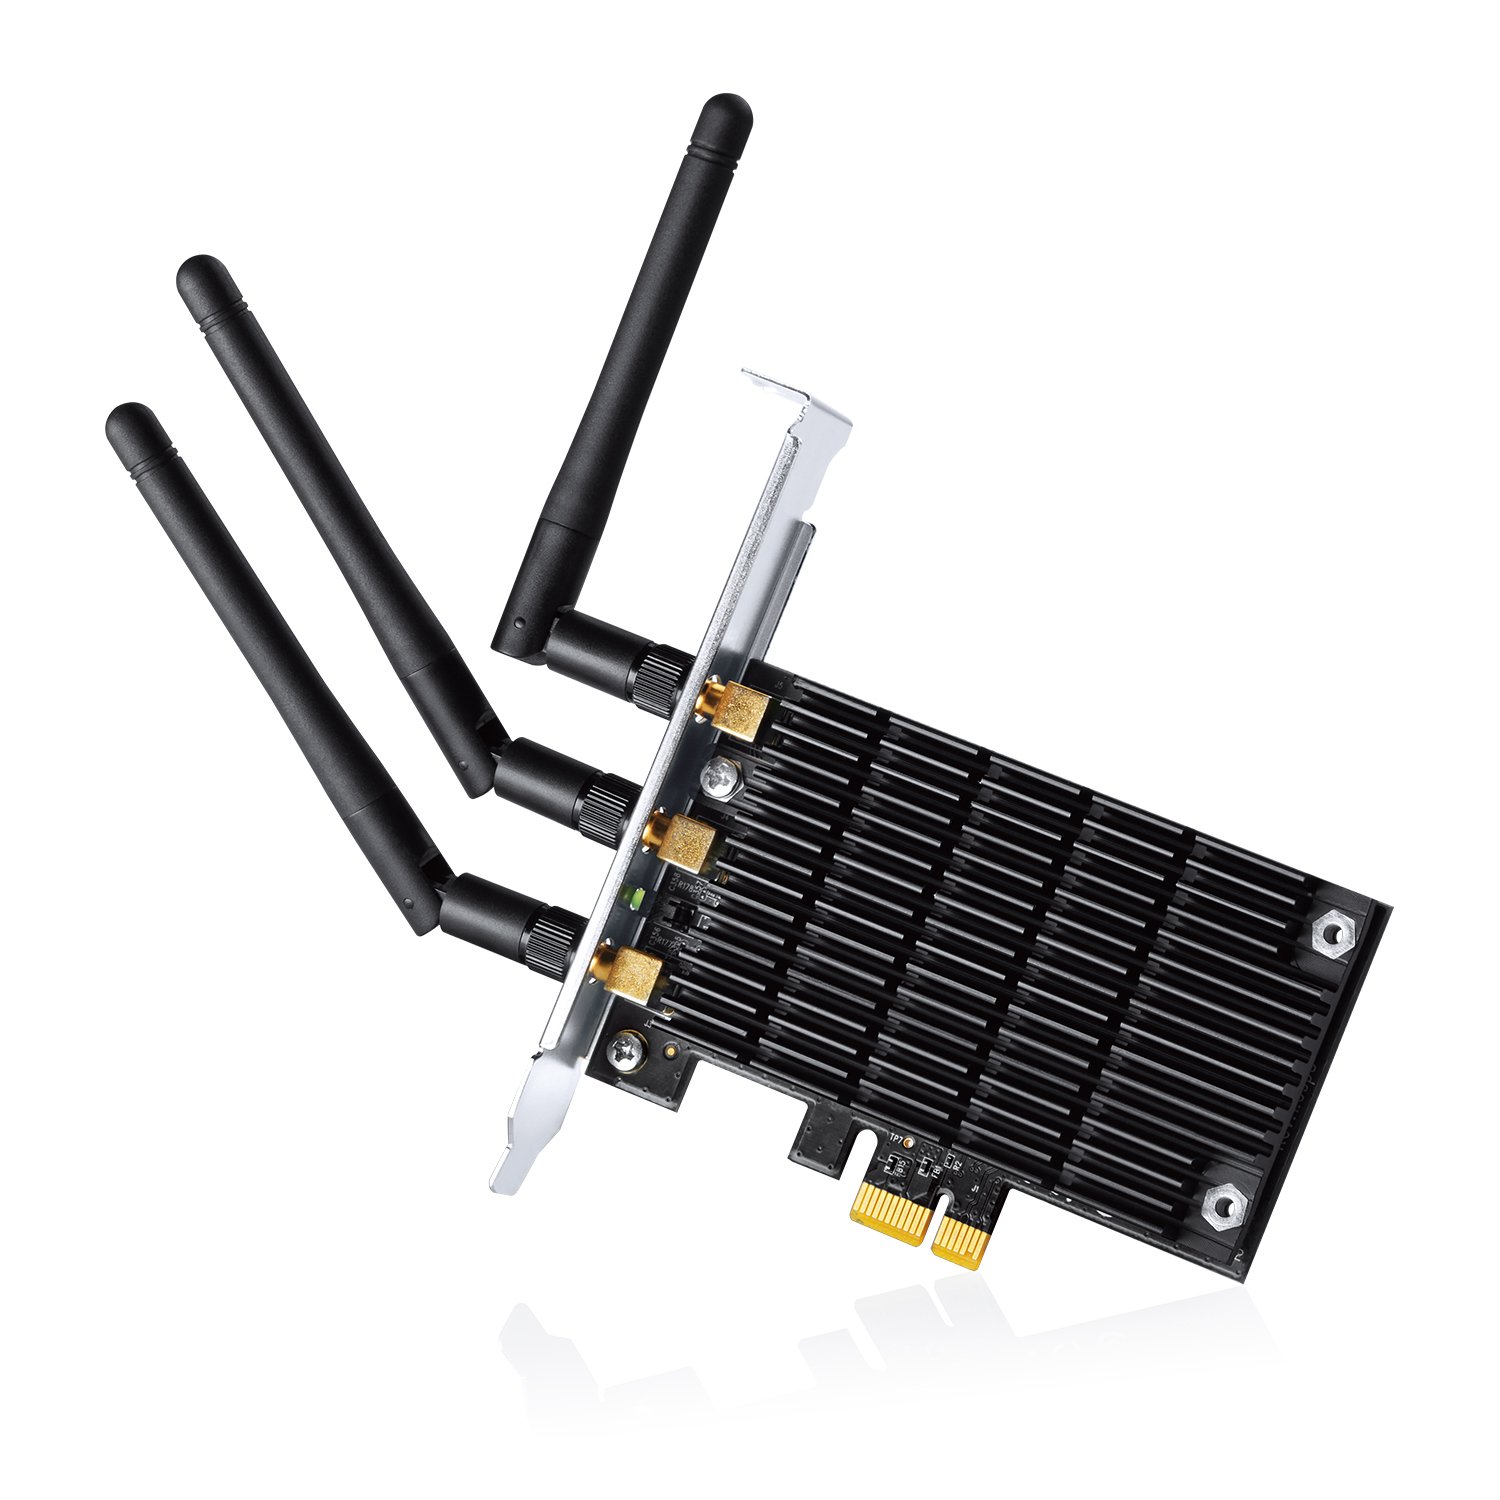 Wireless Networking Cards